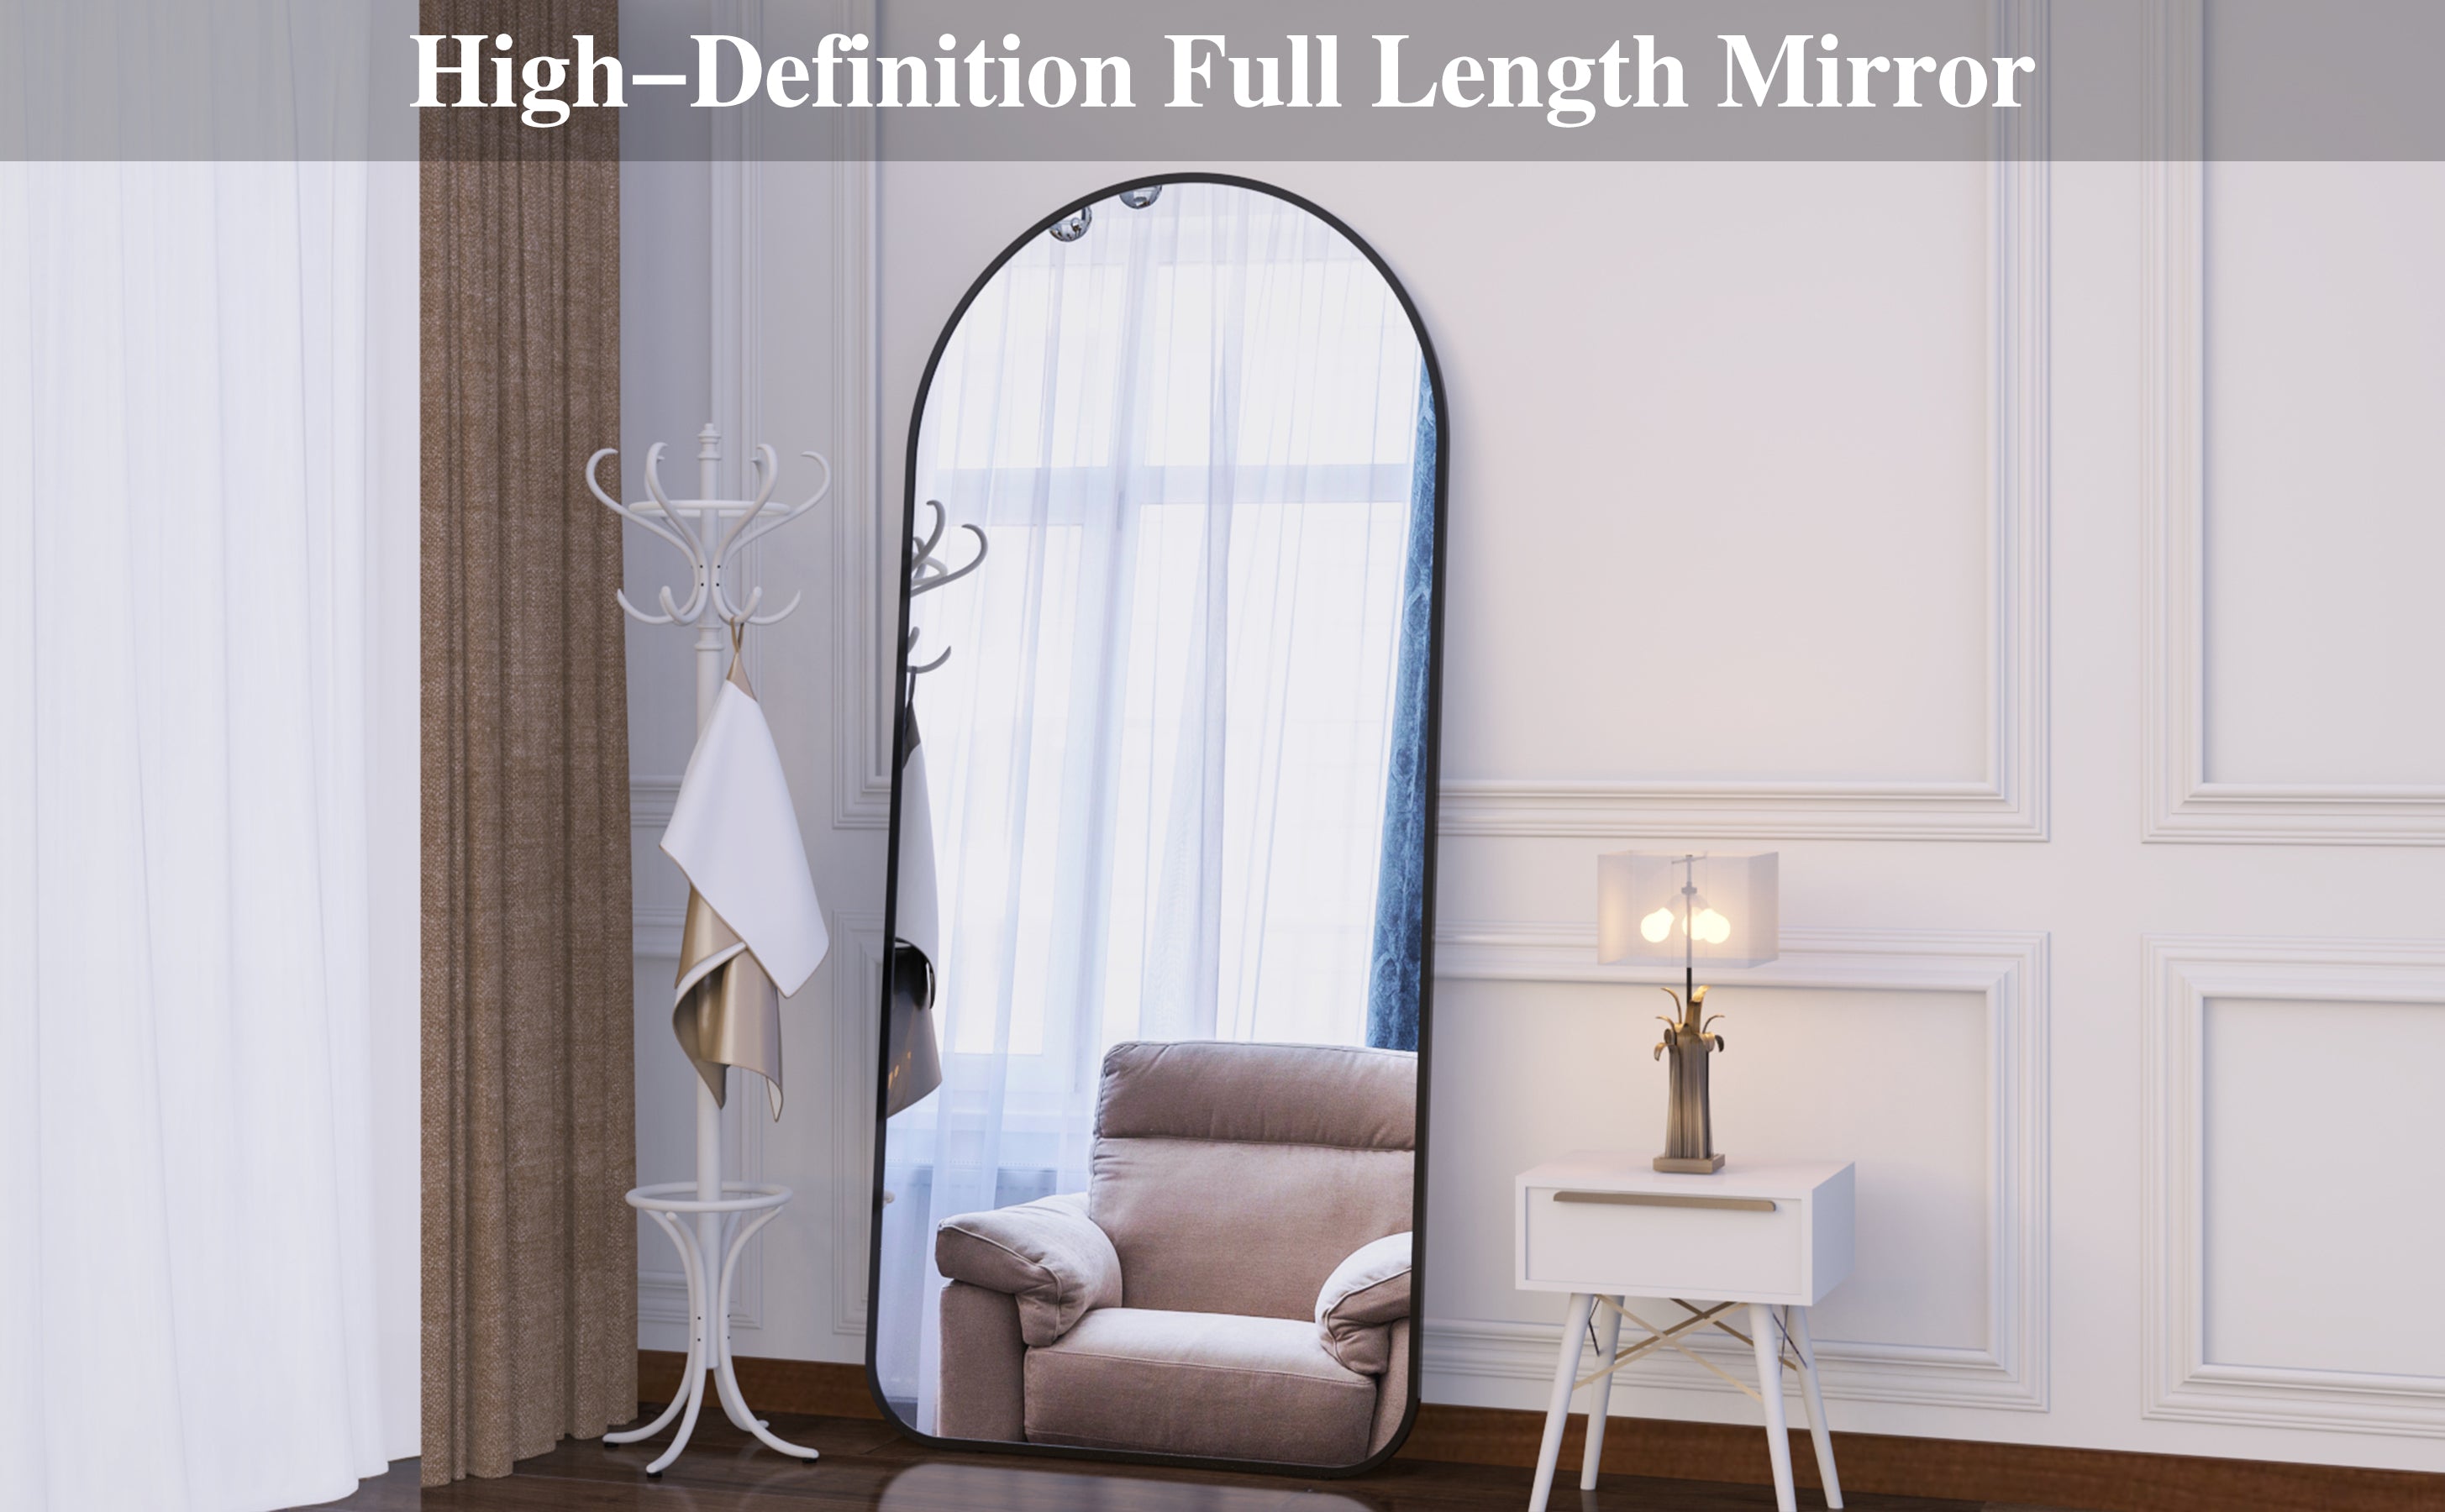 Arch Full Length Mirror 71"×32" Big Full Body Mirror for Bedroom Oversized Floor Mirror Large Standing Mirror Living Room Dressing Mirror Leaning Against Wall, Metal Frame, Black